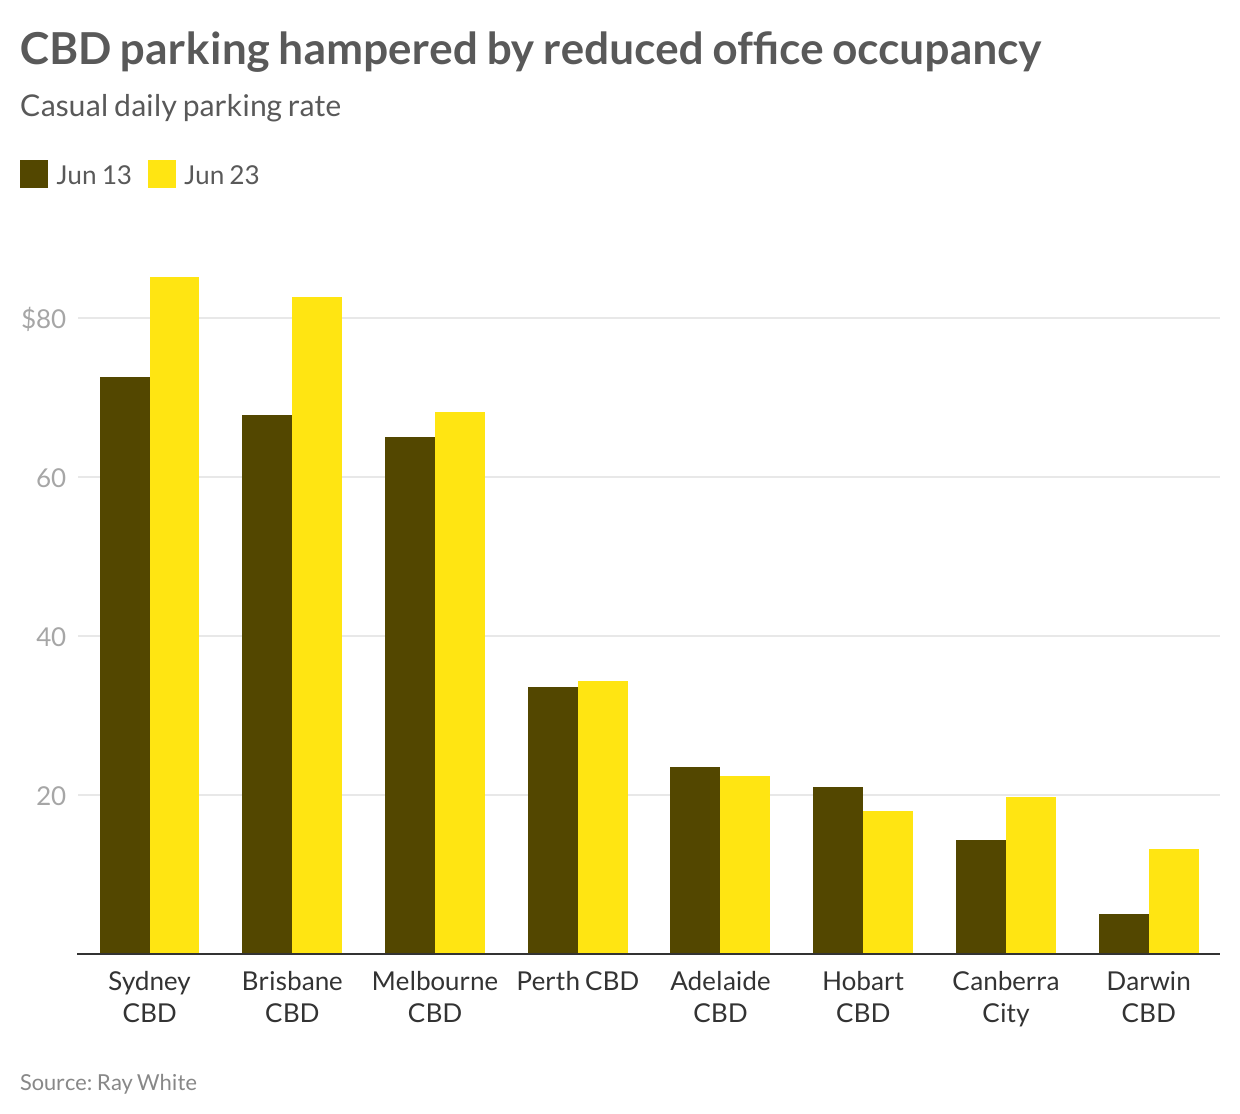 How COVID-19 has impacted the CBD parking sector